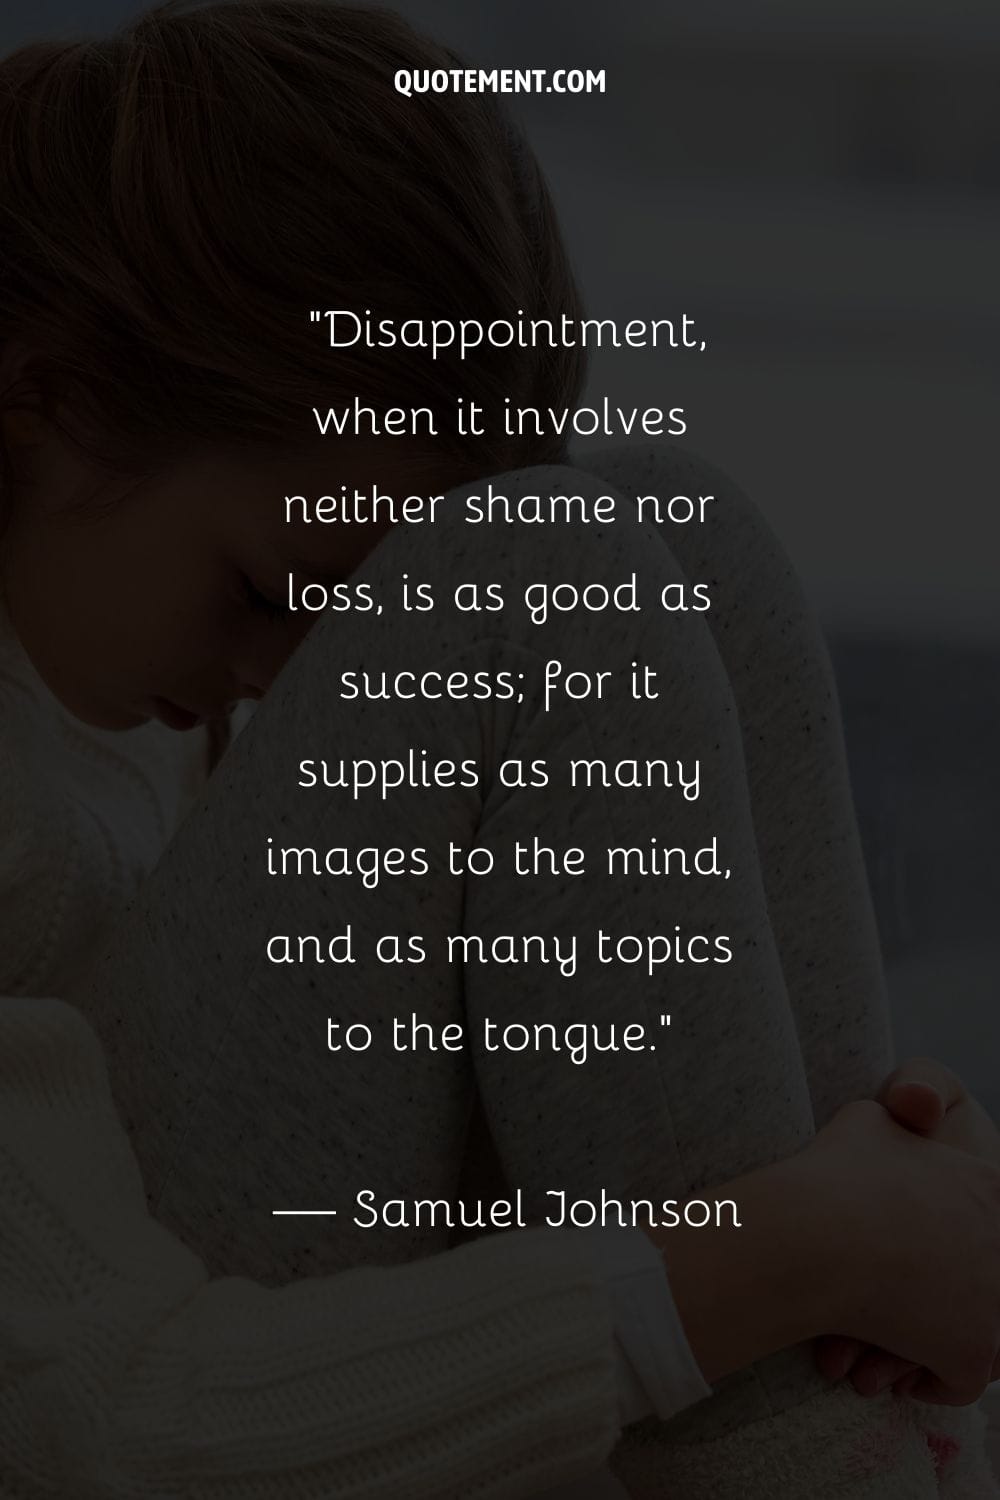 Disappointment, when it involves neither shame nor loss, is as good as success